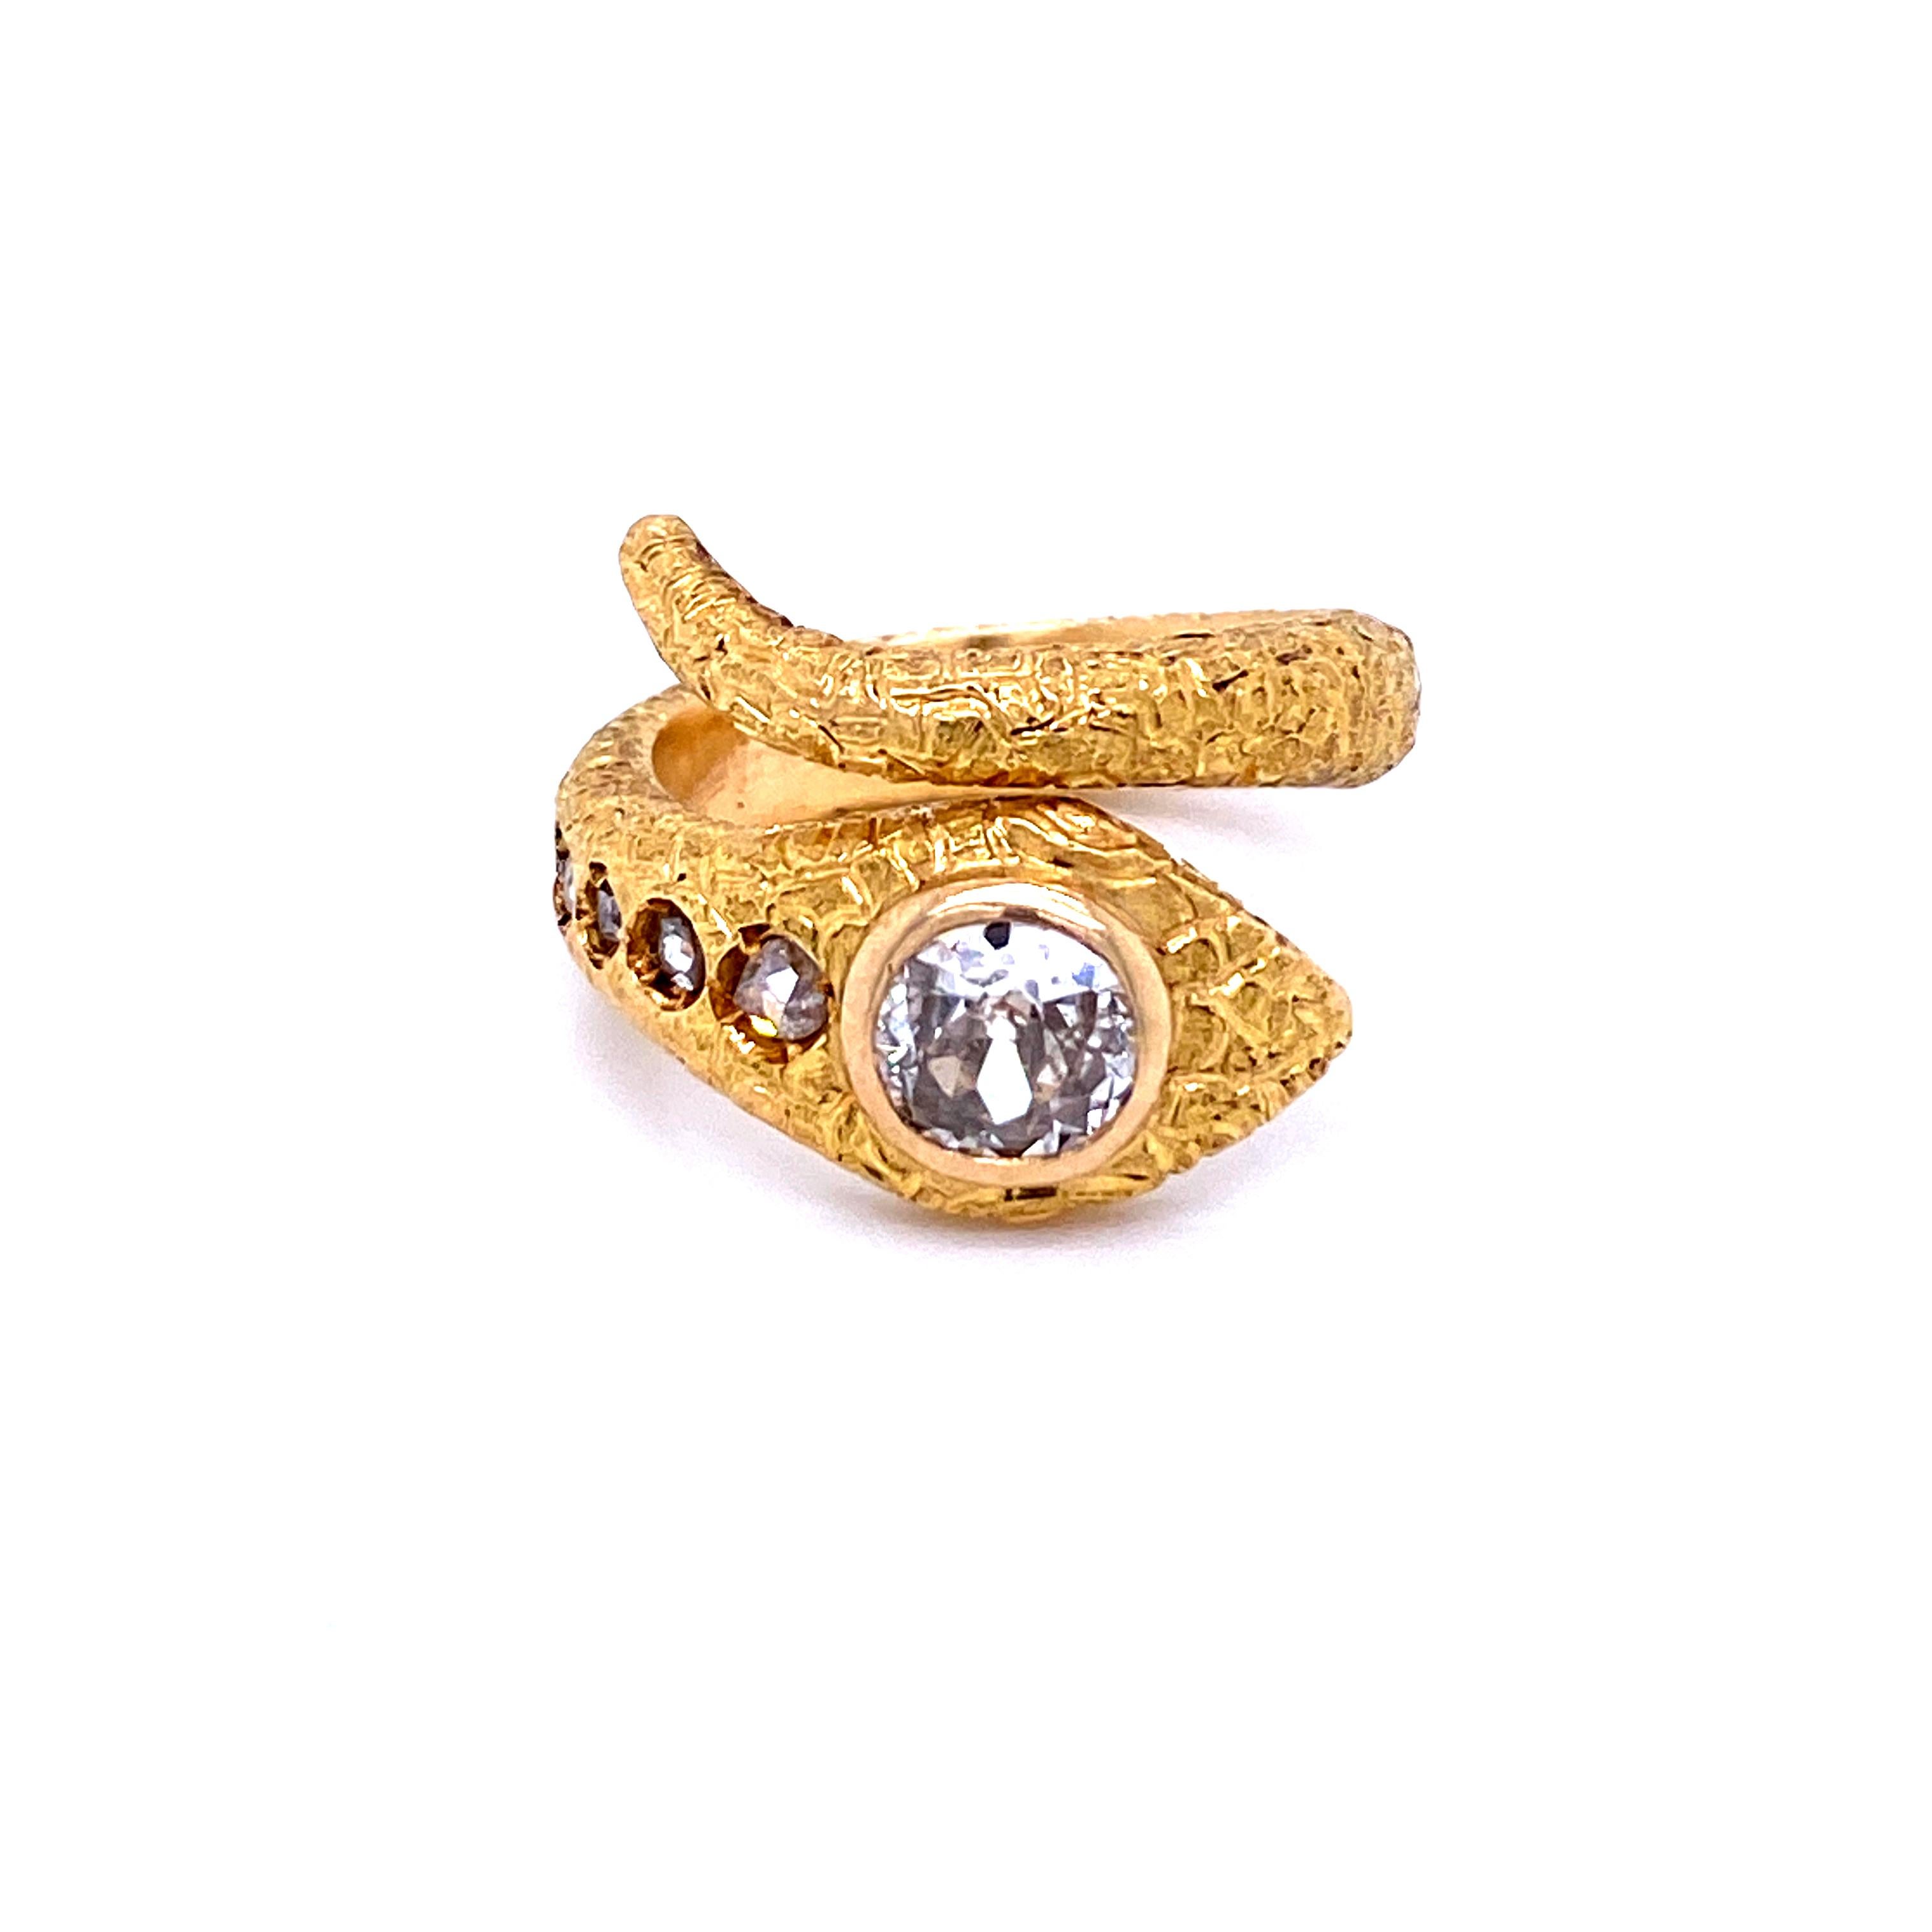 Gorgeous design ring, dated '1900, handcrafted in 18K gold. The head of the snake is embellished with a large sparkling Old mine cut Diamond eye, weight 1 Carat graded I Color Si1, and following 5 rose cut diamonds in order of size, total weight